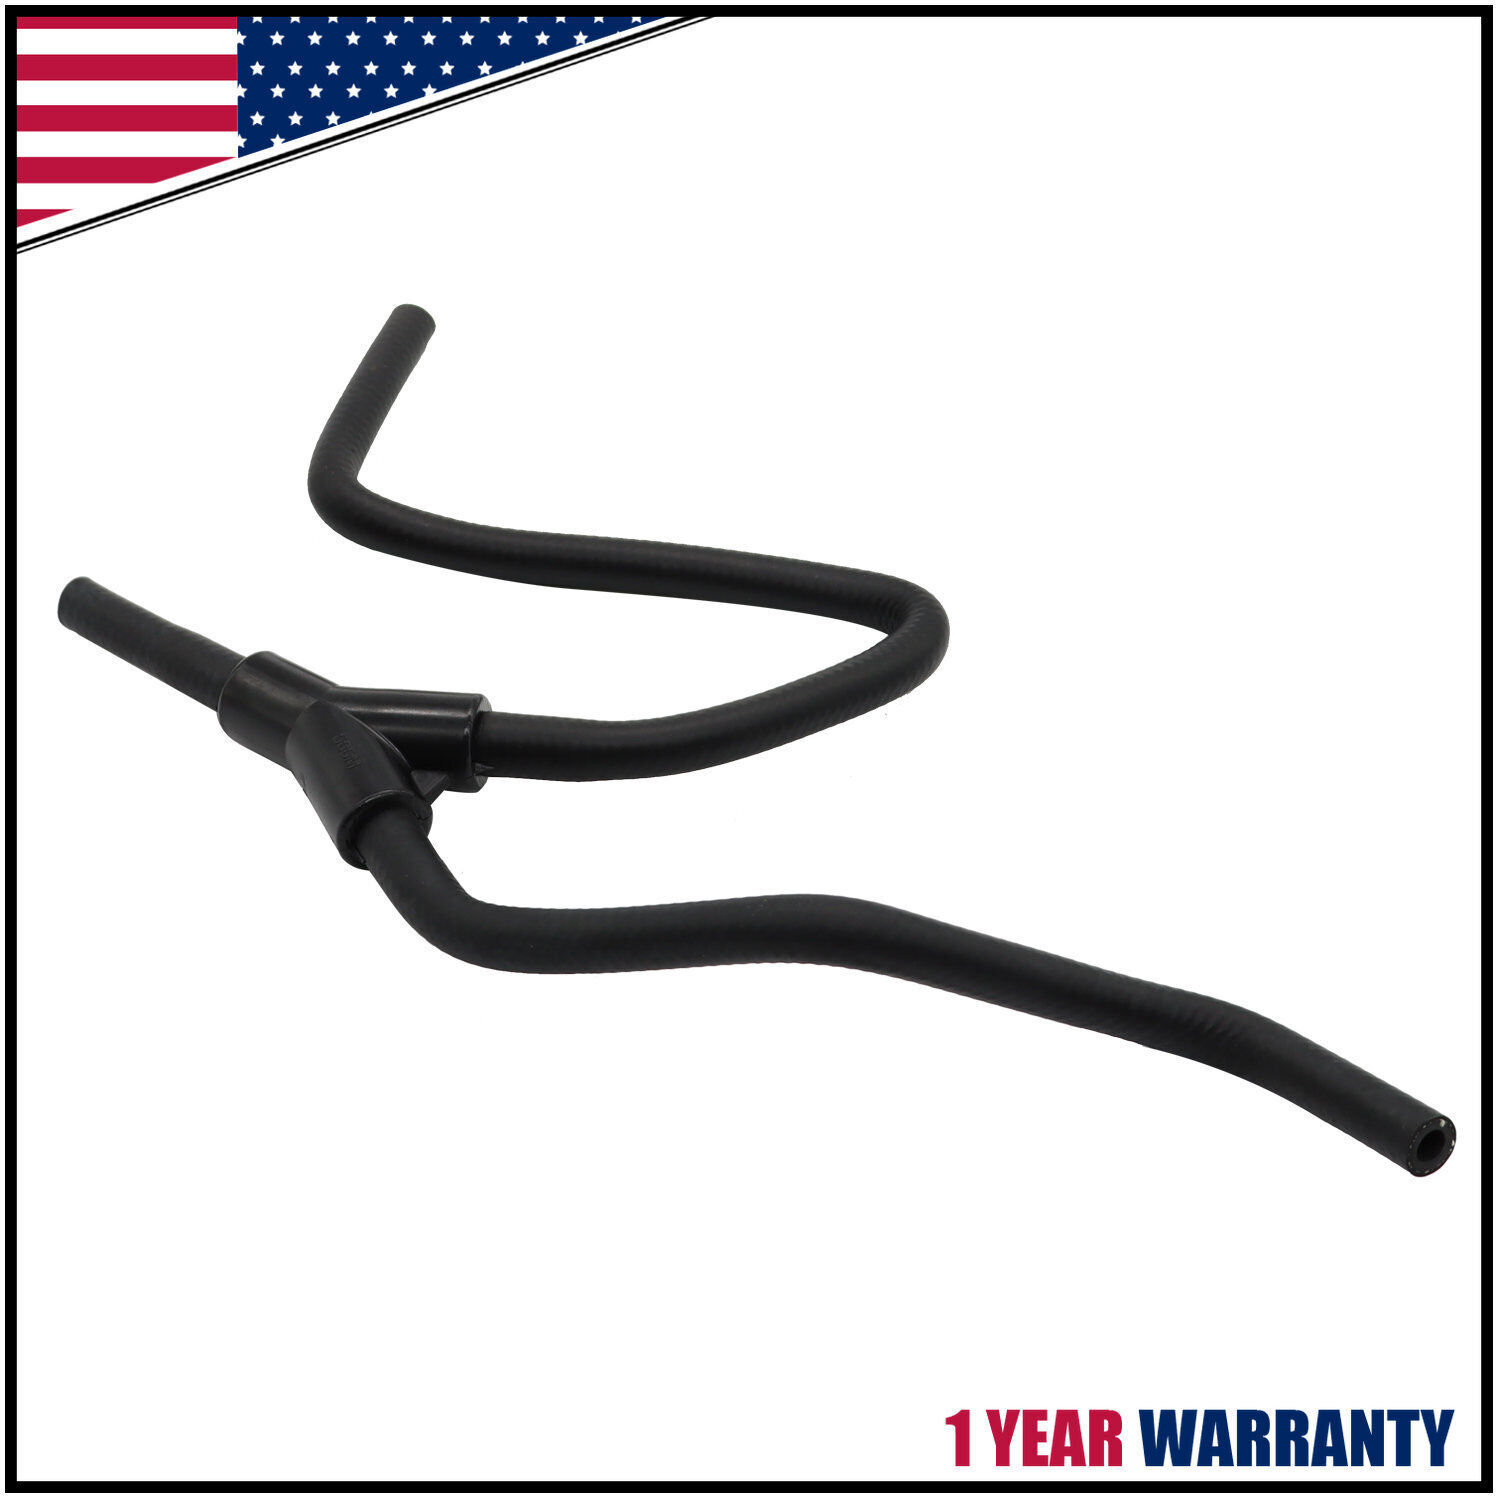 Upper Radiator Inlet Hose #22908202 Fit For Cadillac ATS CTS 2.0L I4 2013-19 New